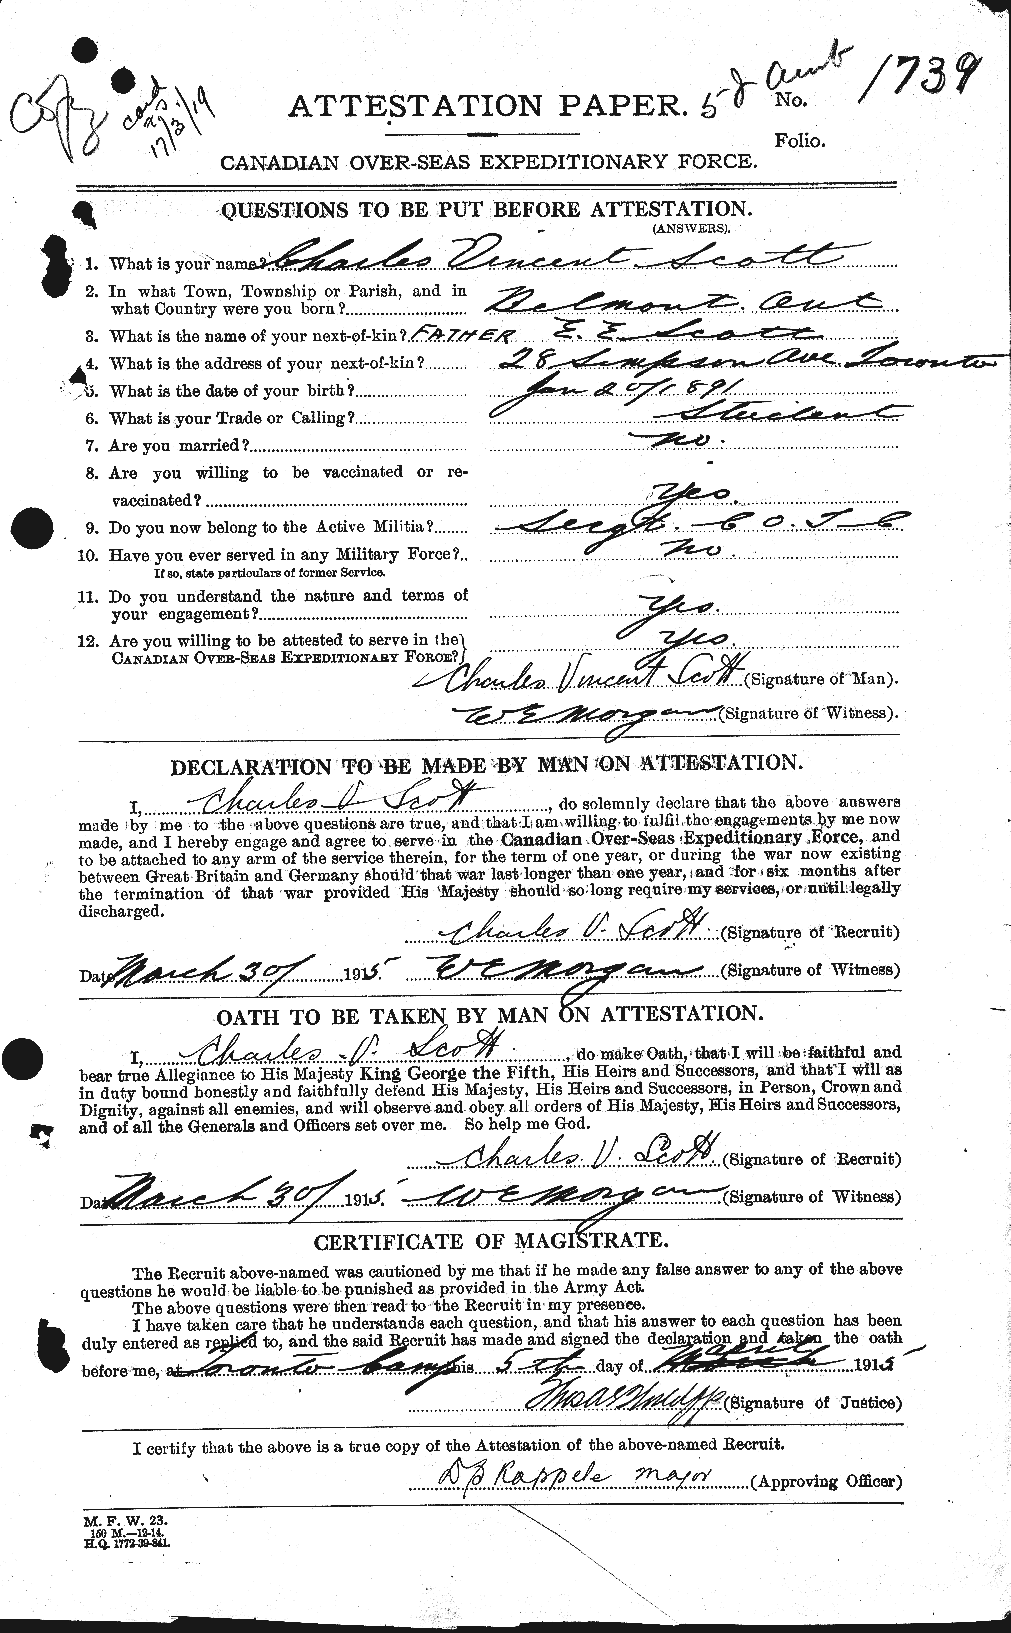 Personnel Records of the First World War - CEF 085874a